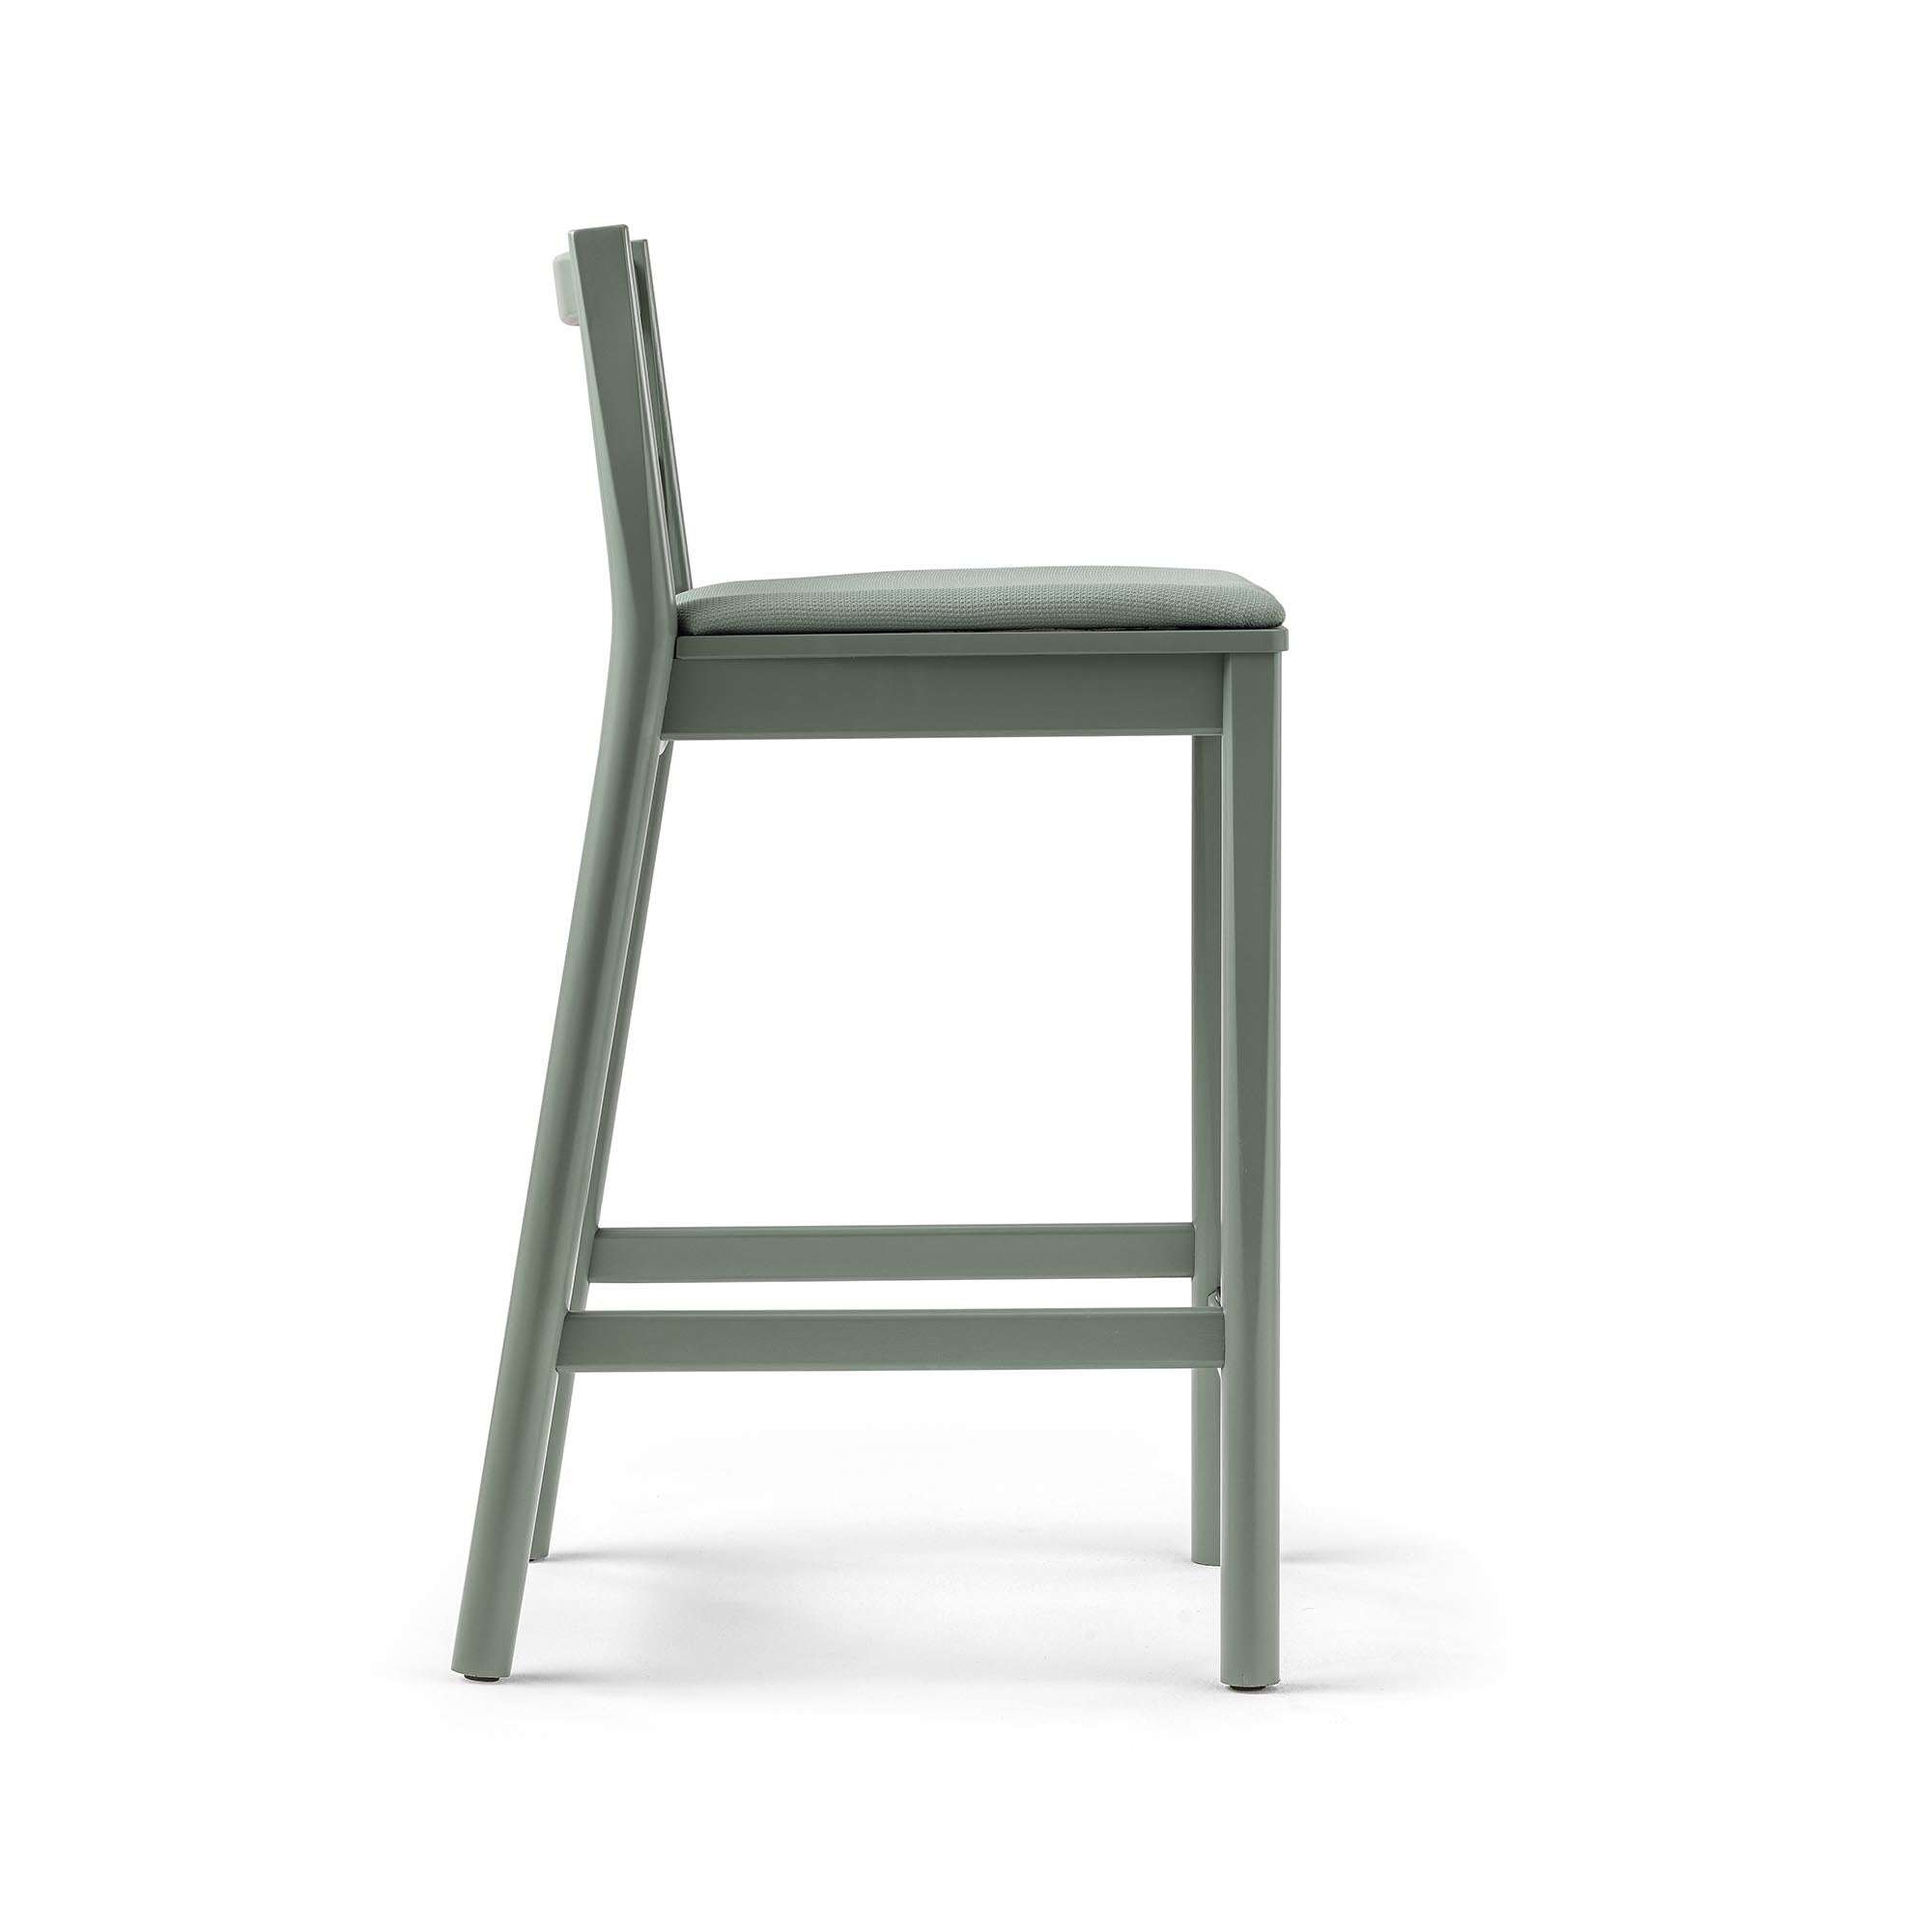 JULIE IMB Stool green seat and frame, side view